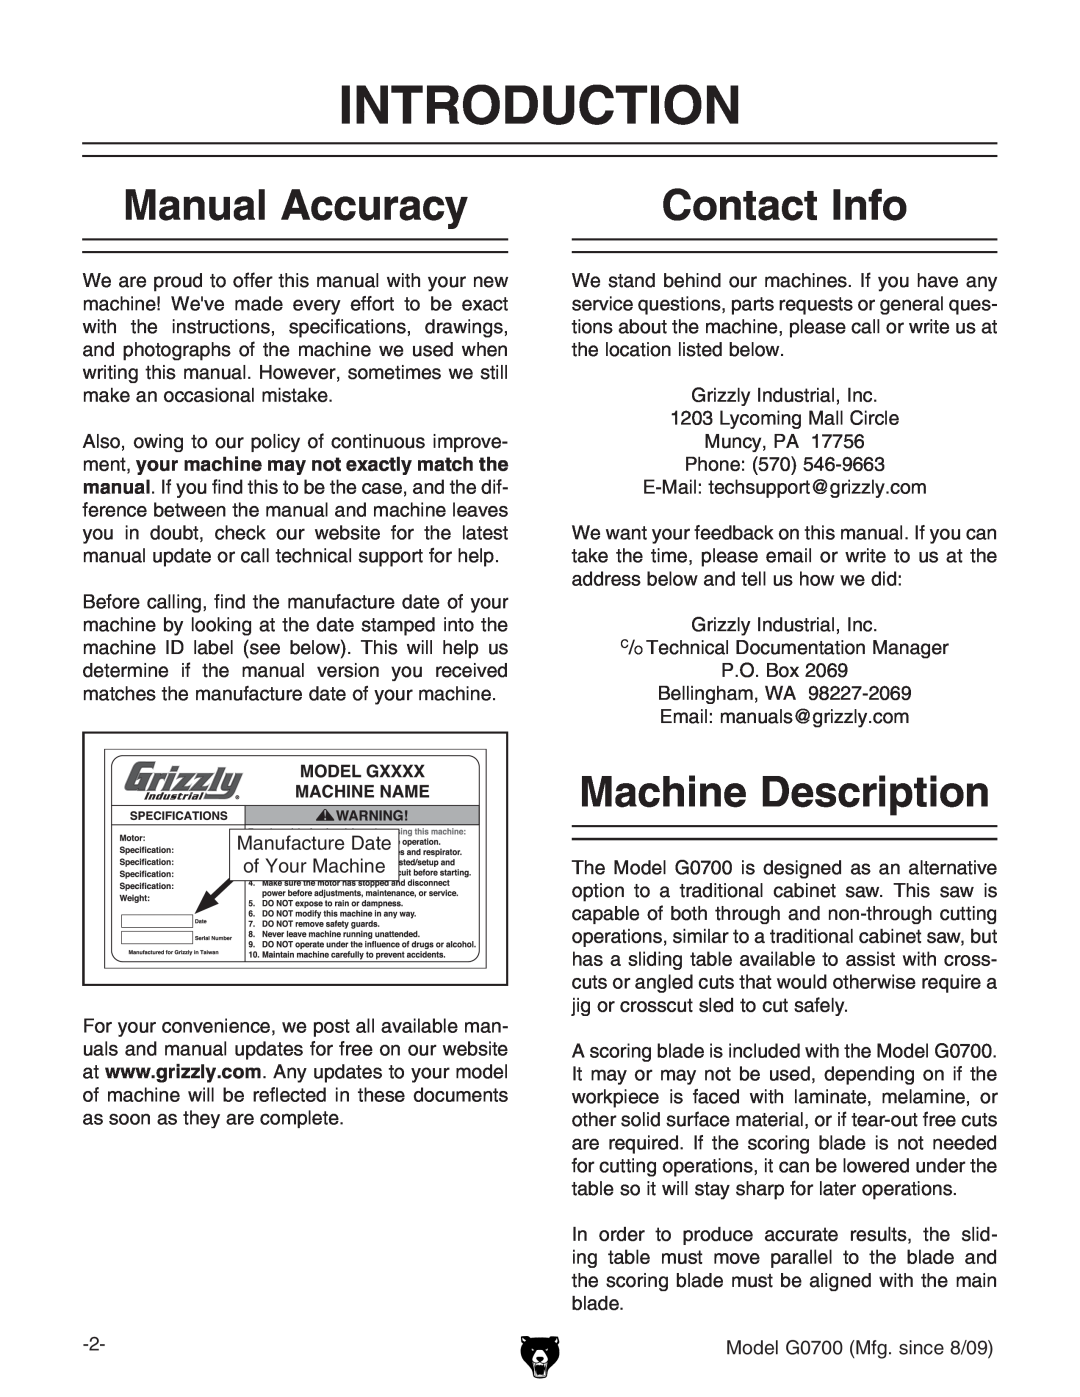 Grizzly G0700 owner manual Introduction, Manual Accuracy, Contact Info, Machine Description 